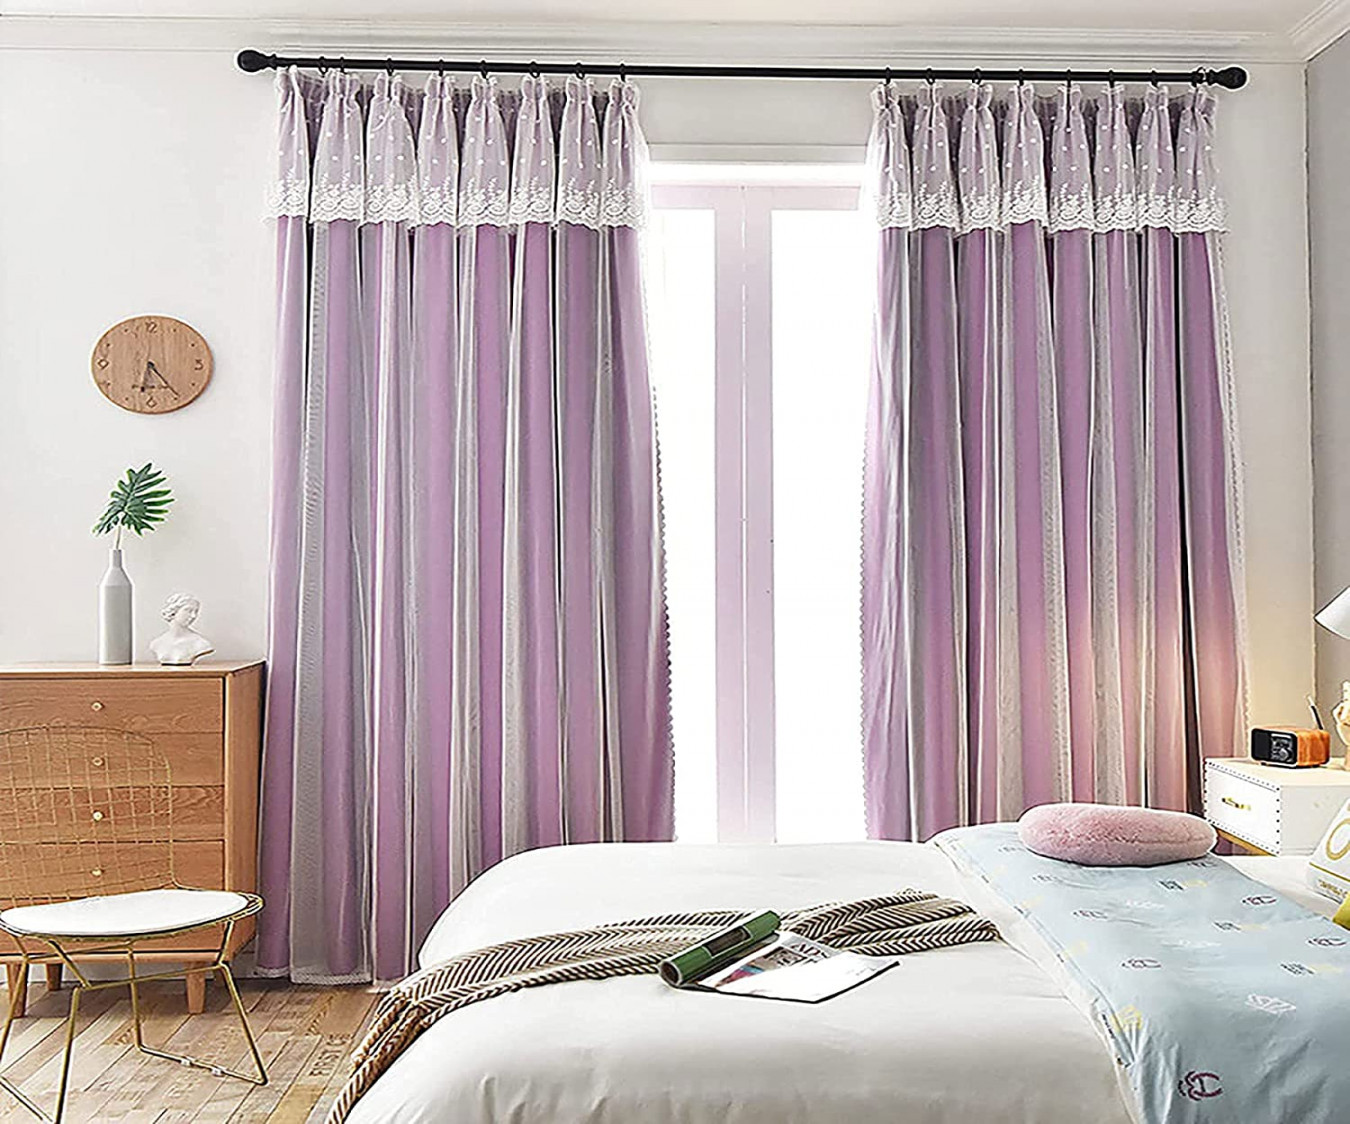 Curtains For Bedroom Window